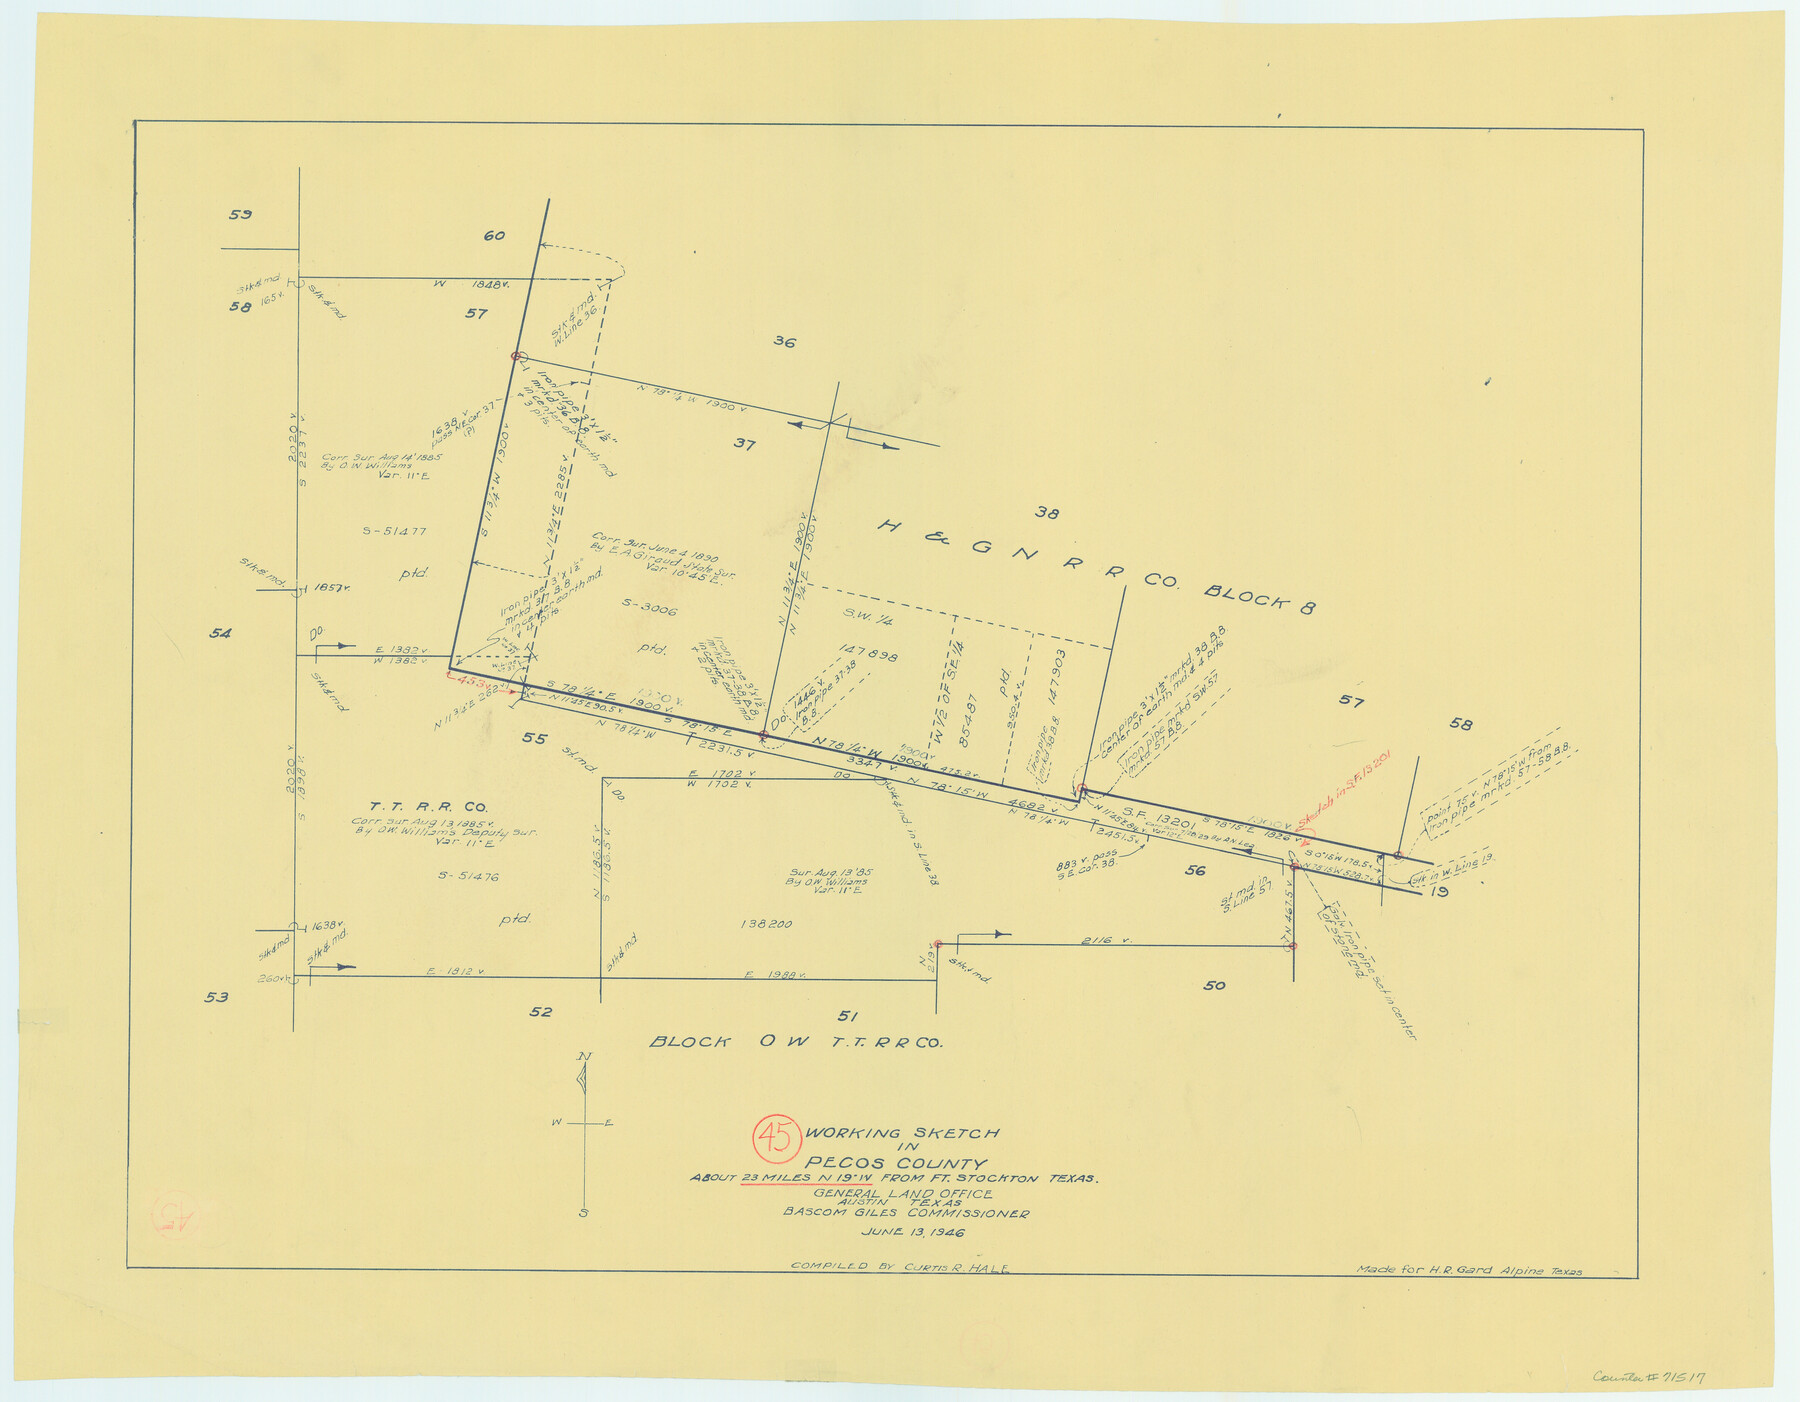 71517, Pecos County Working Sketch 45, General Map Collection